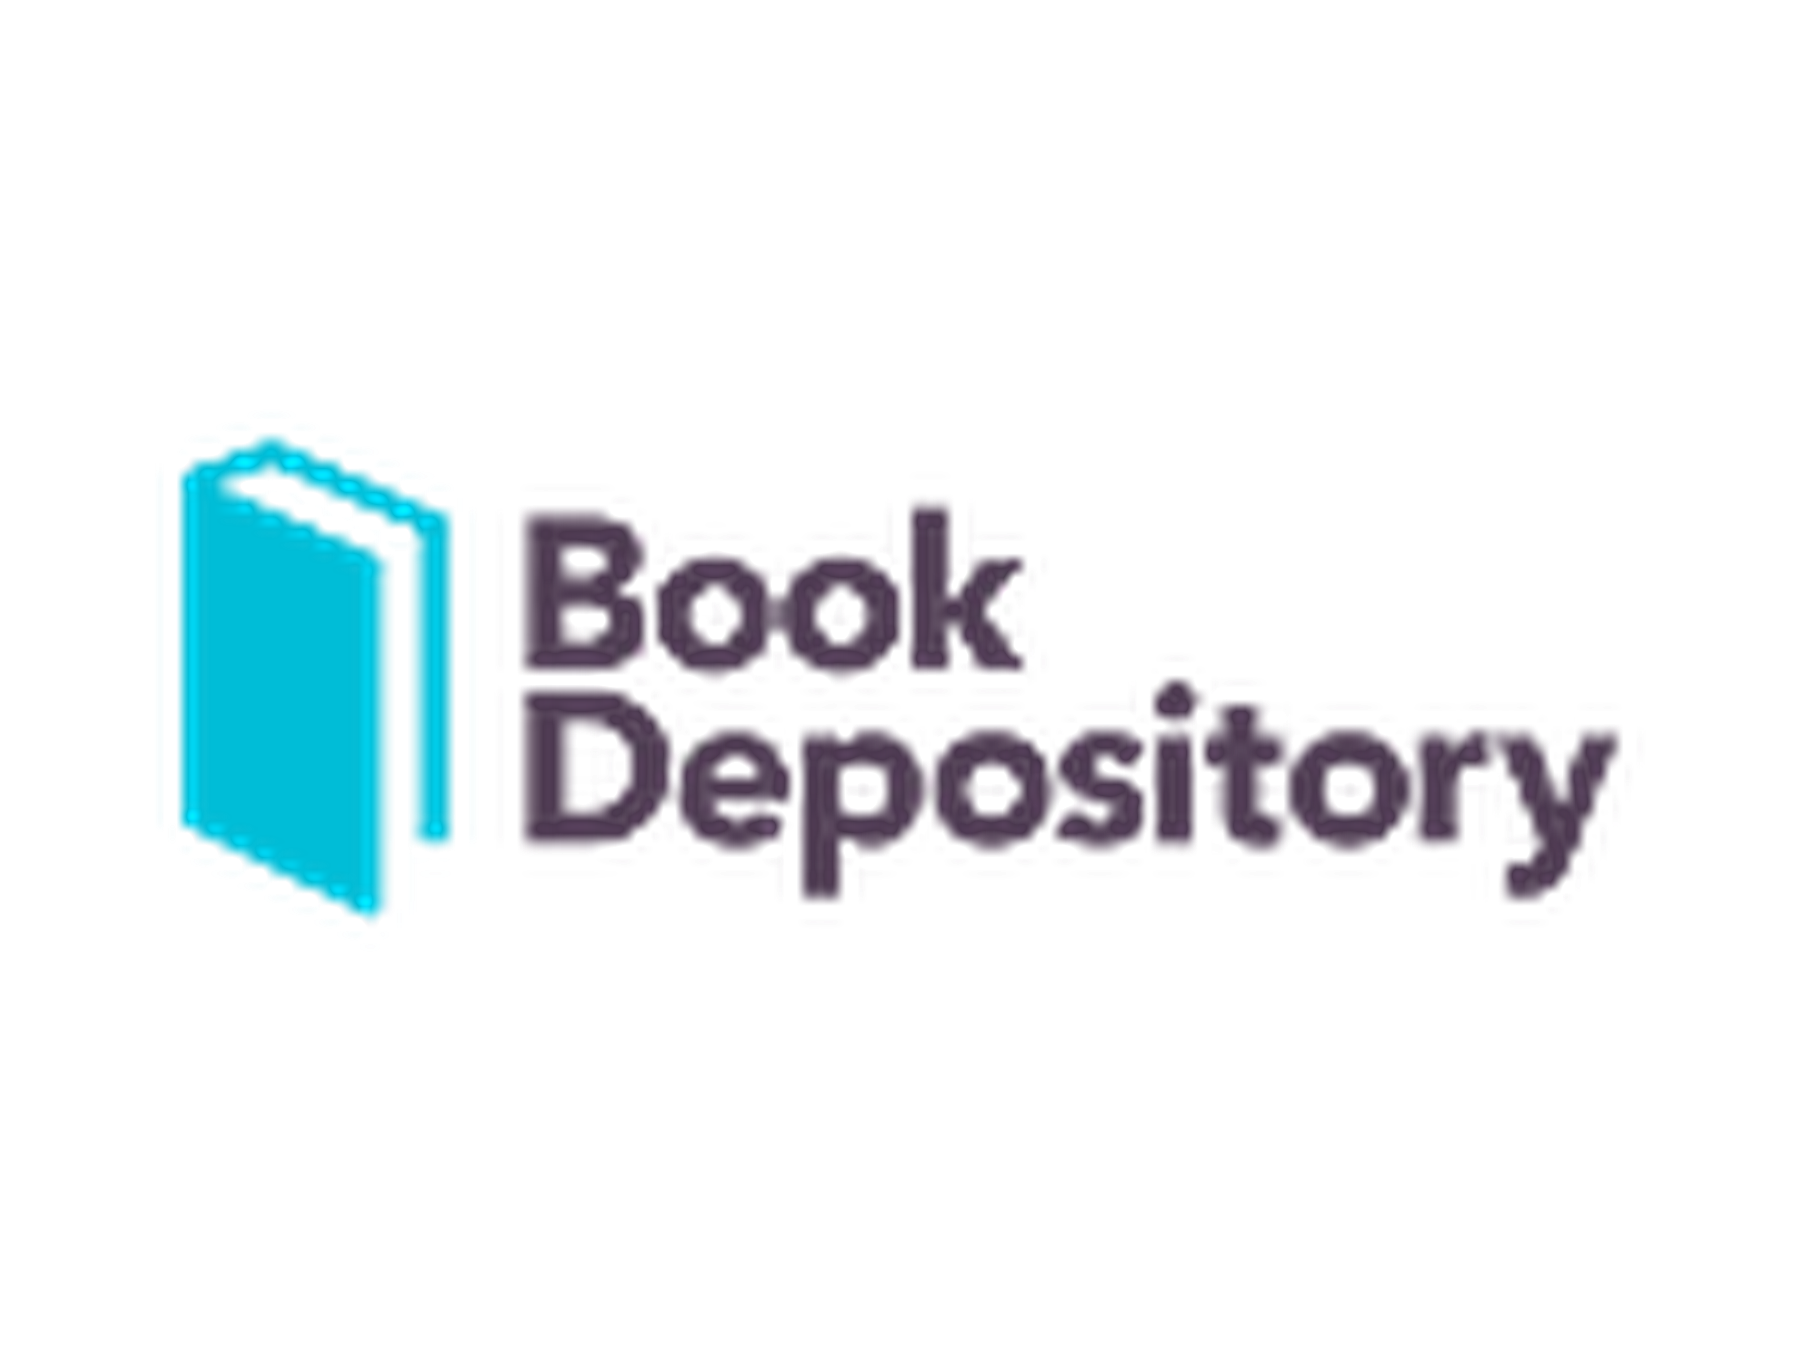 Book Depository Coupon